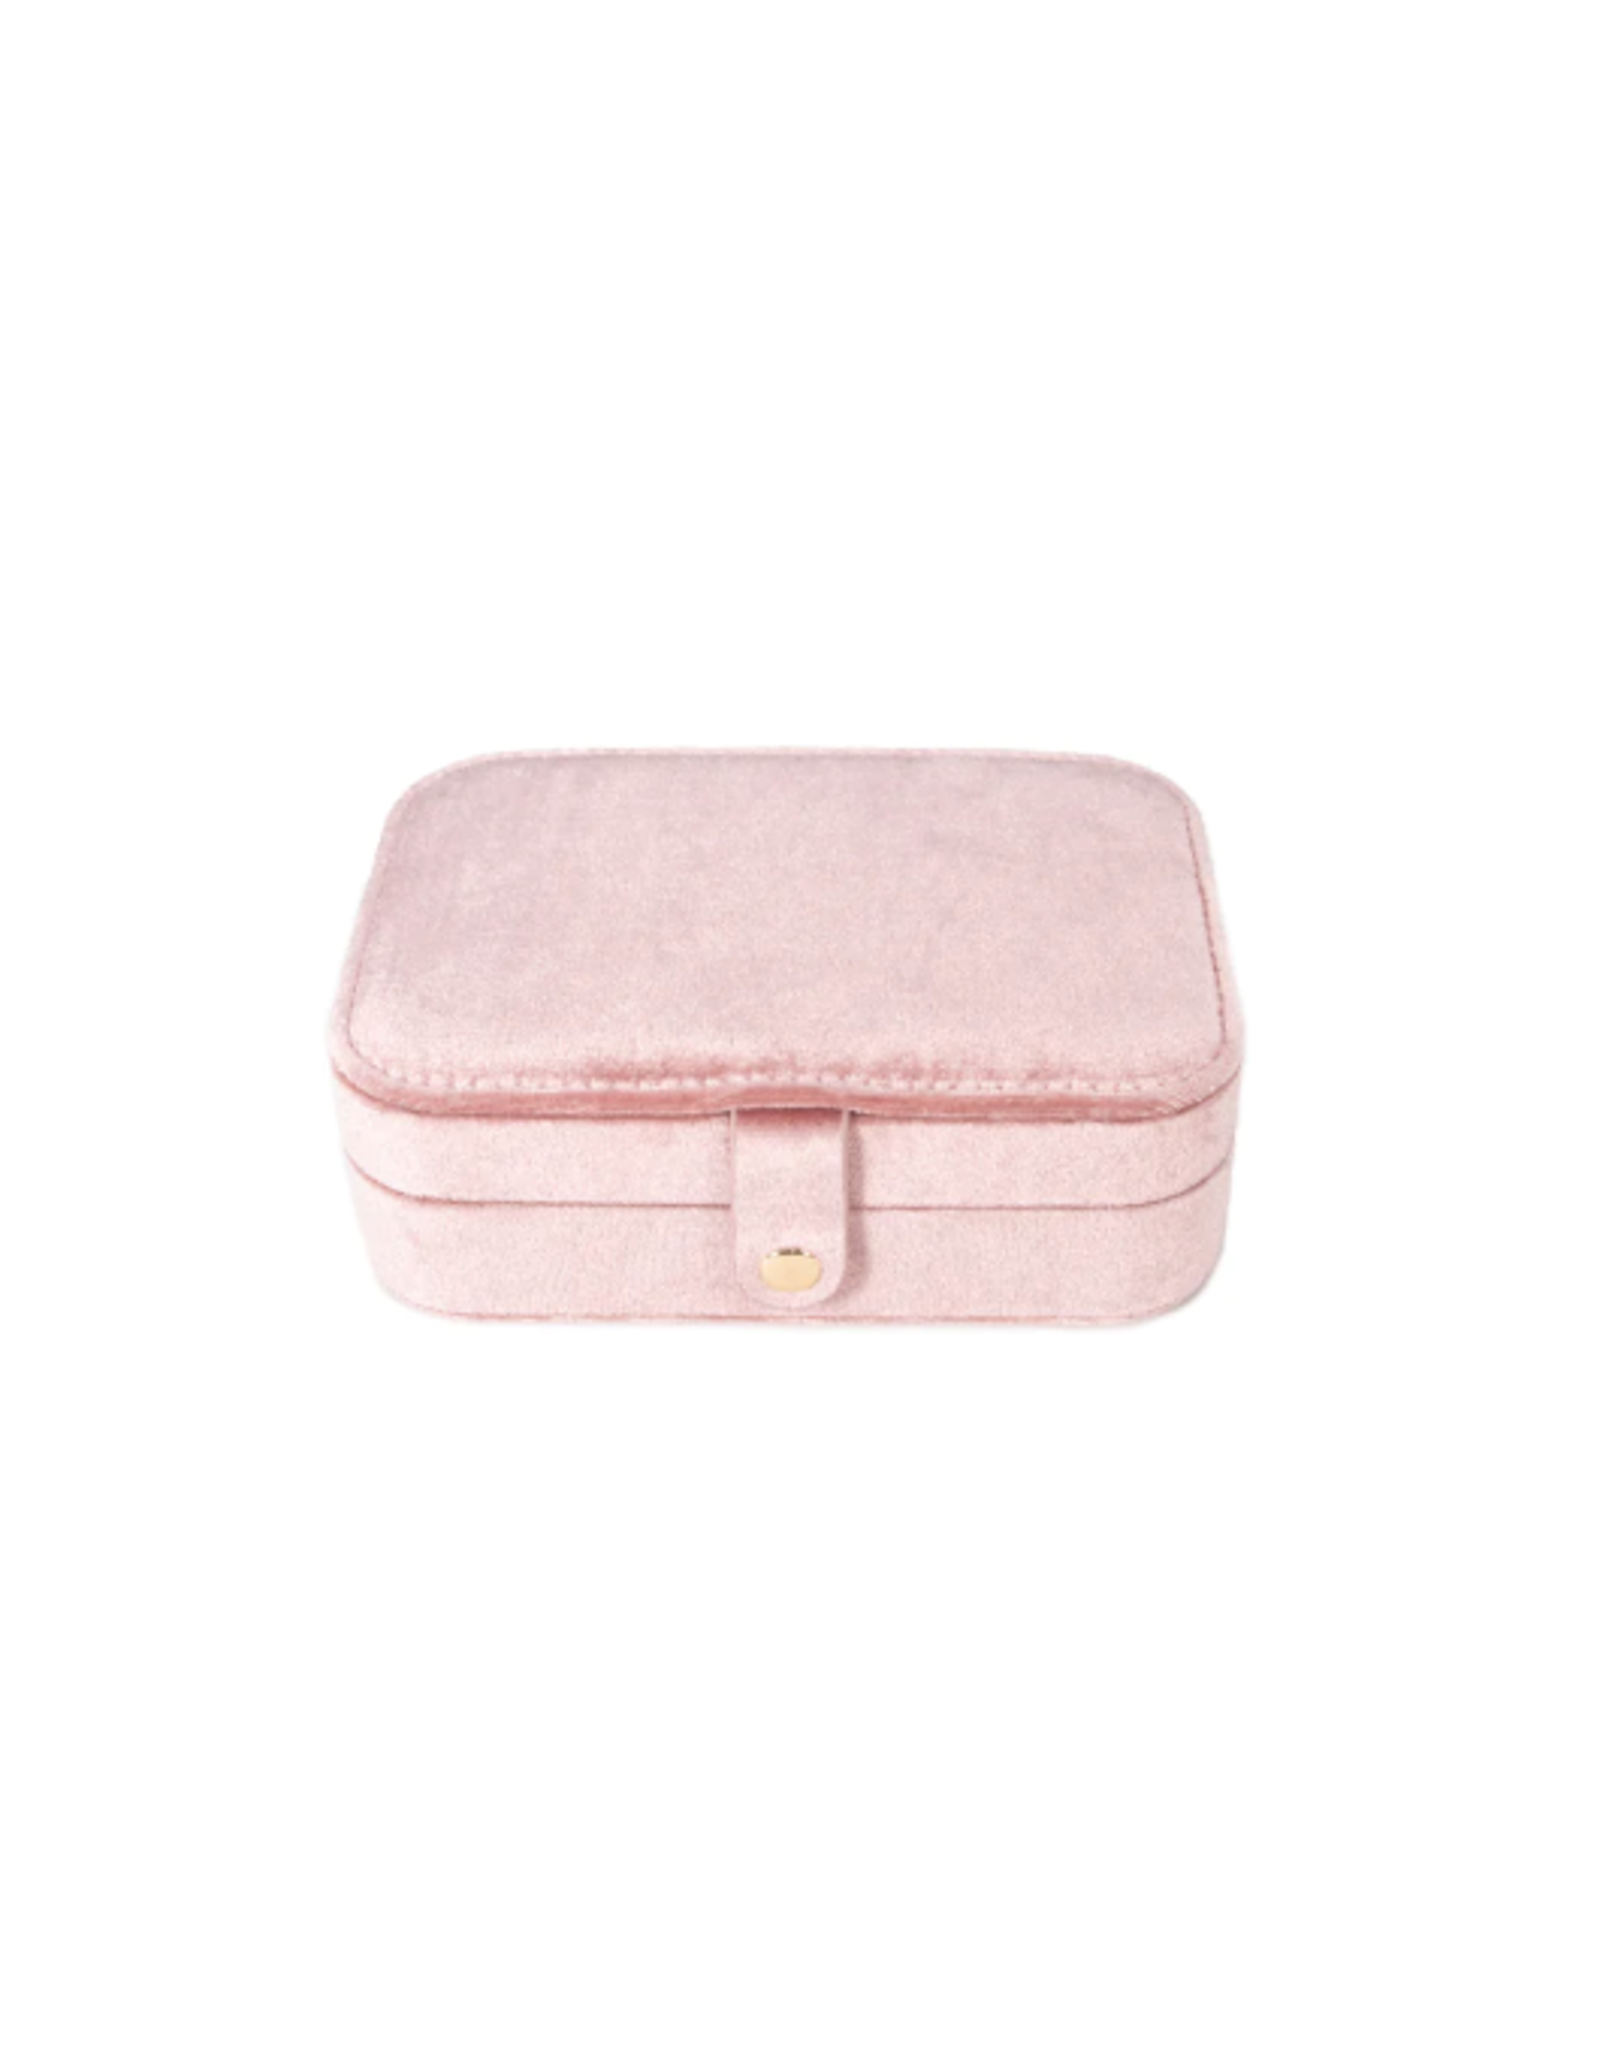 Accessories Shop at Junebug Vera Velvet Rectangle Jewelry Case in Pink